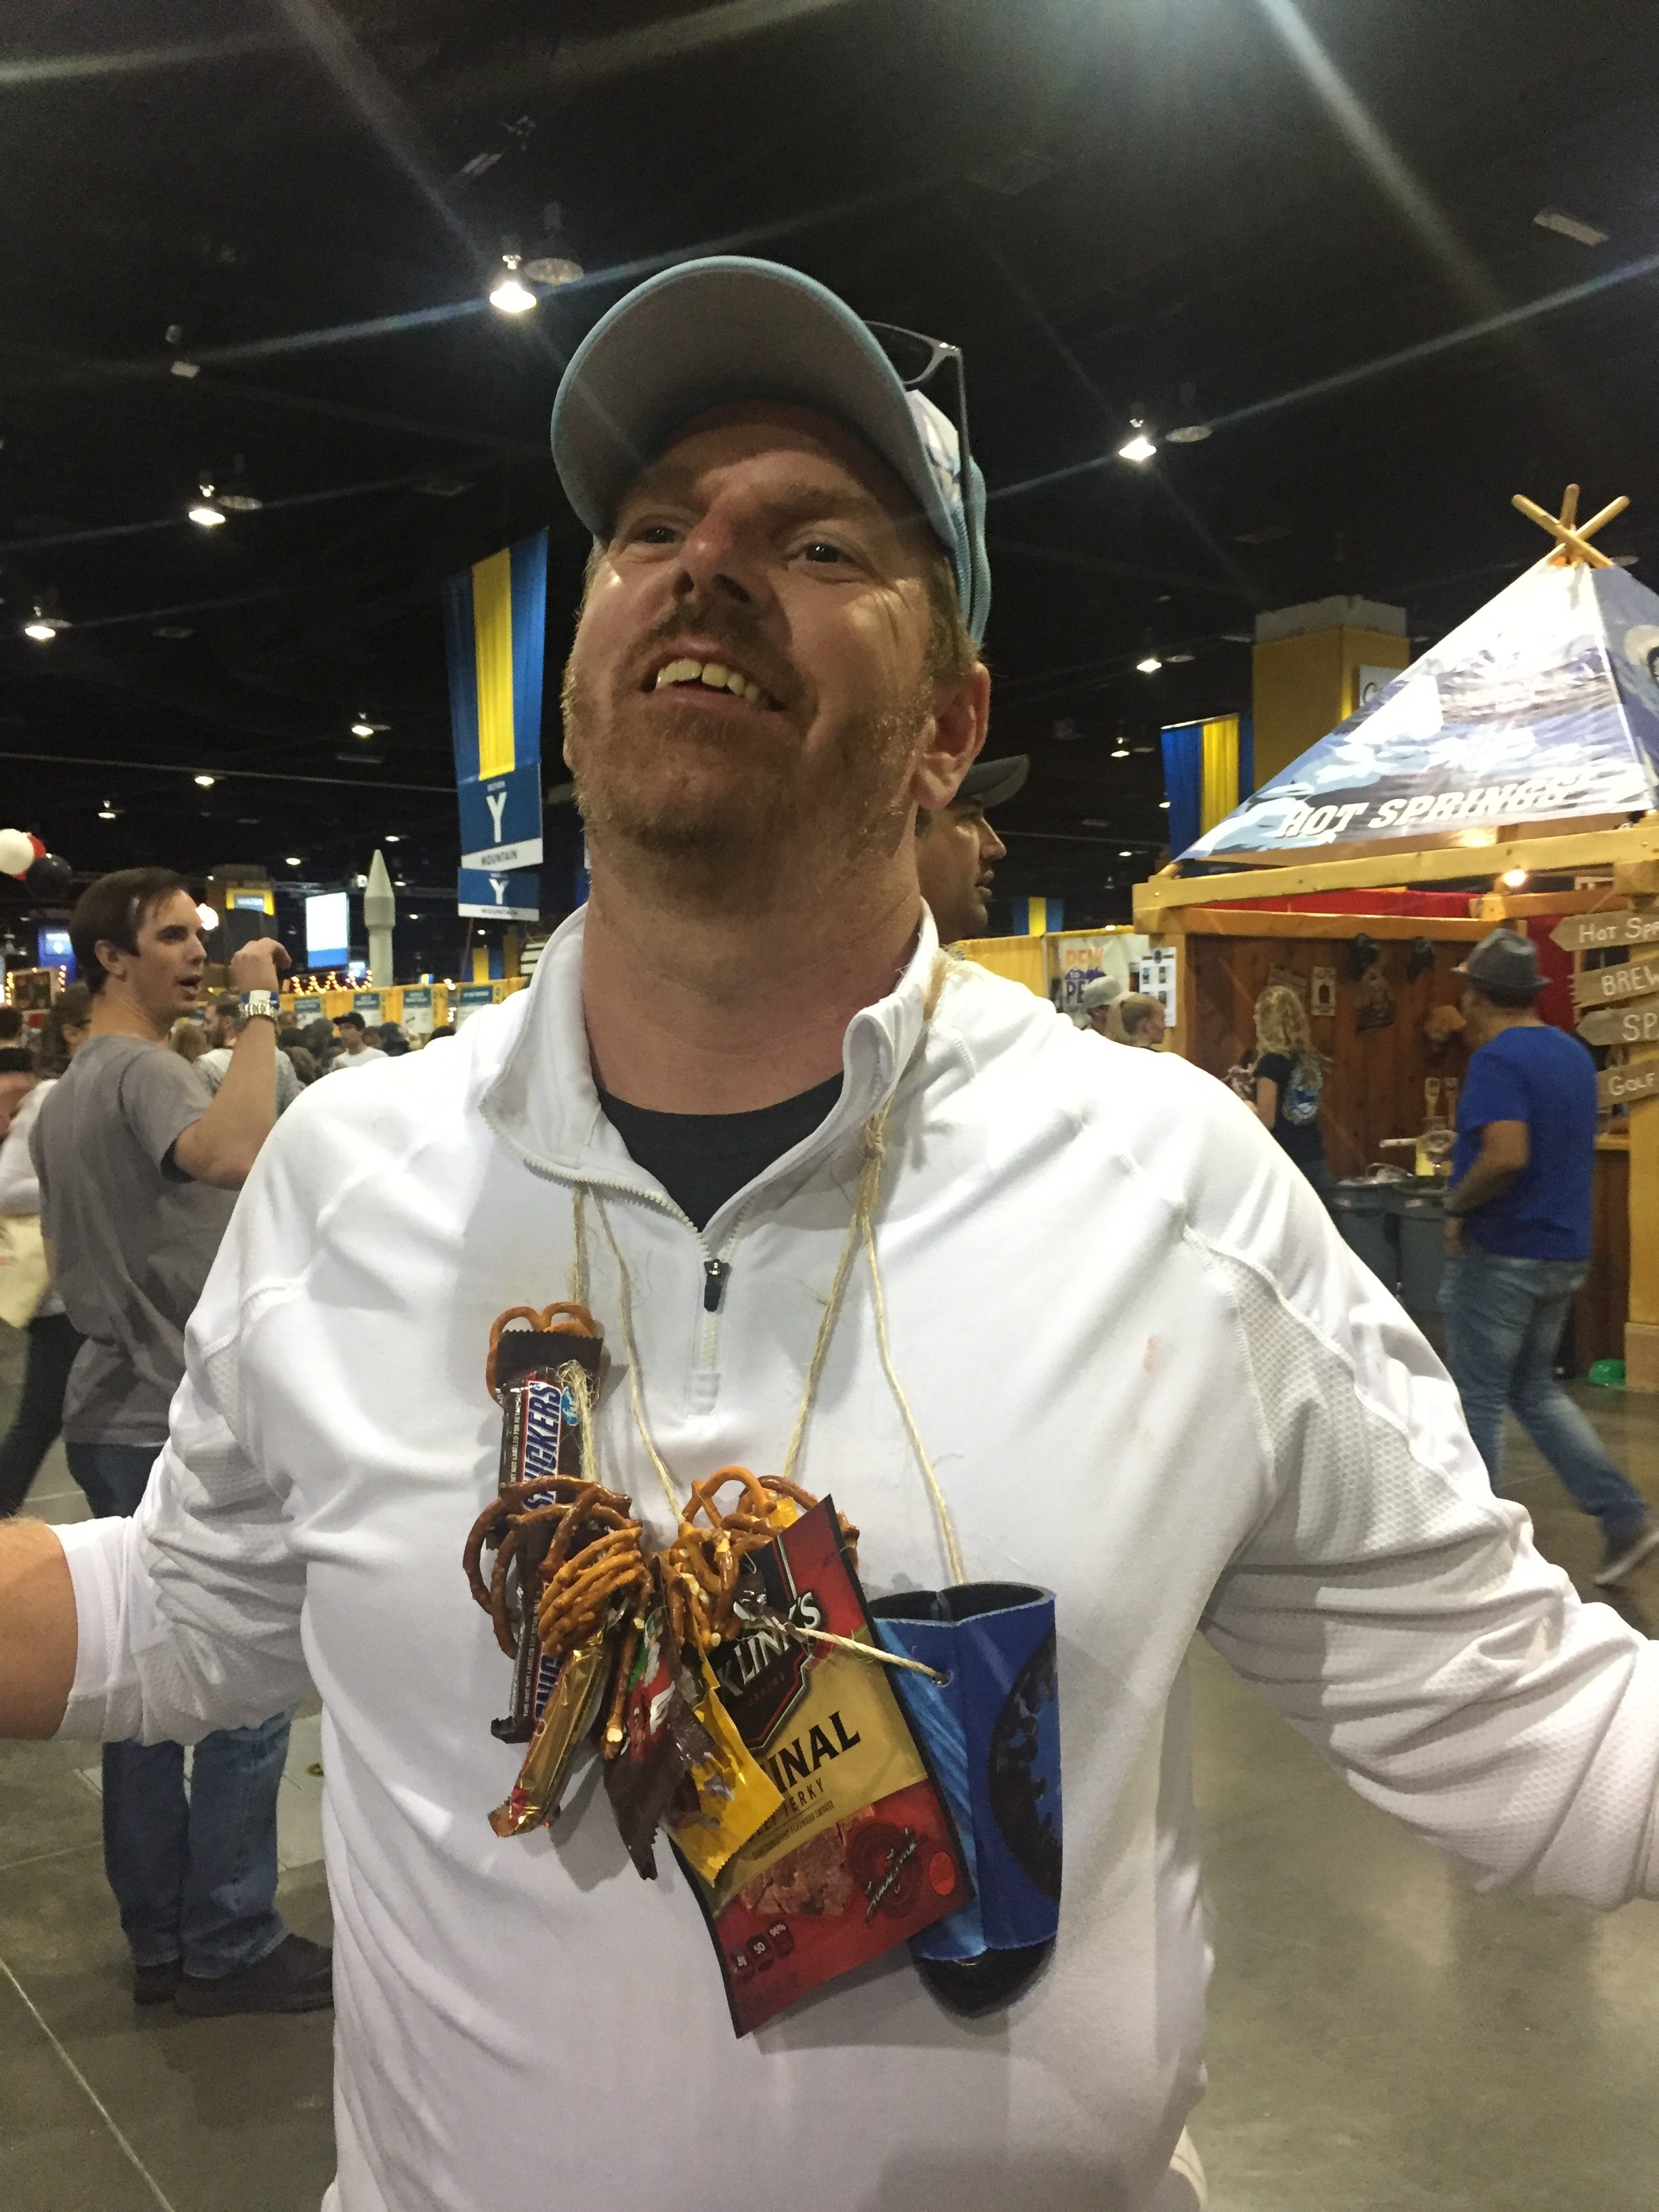 5 Tips to Survive the 2022 Great American Beer Festival